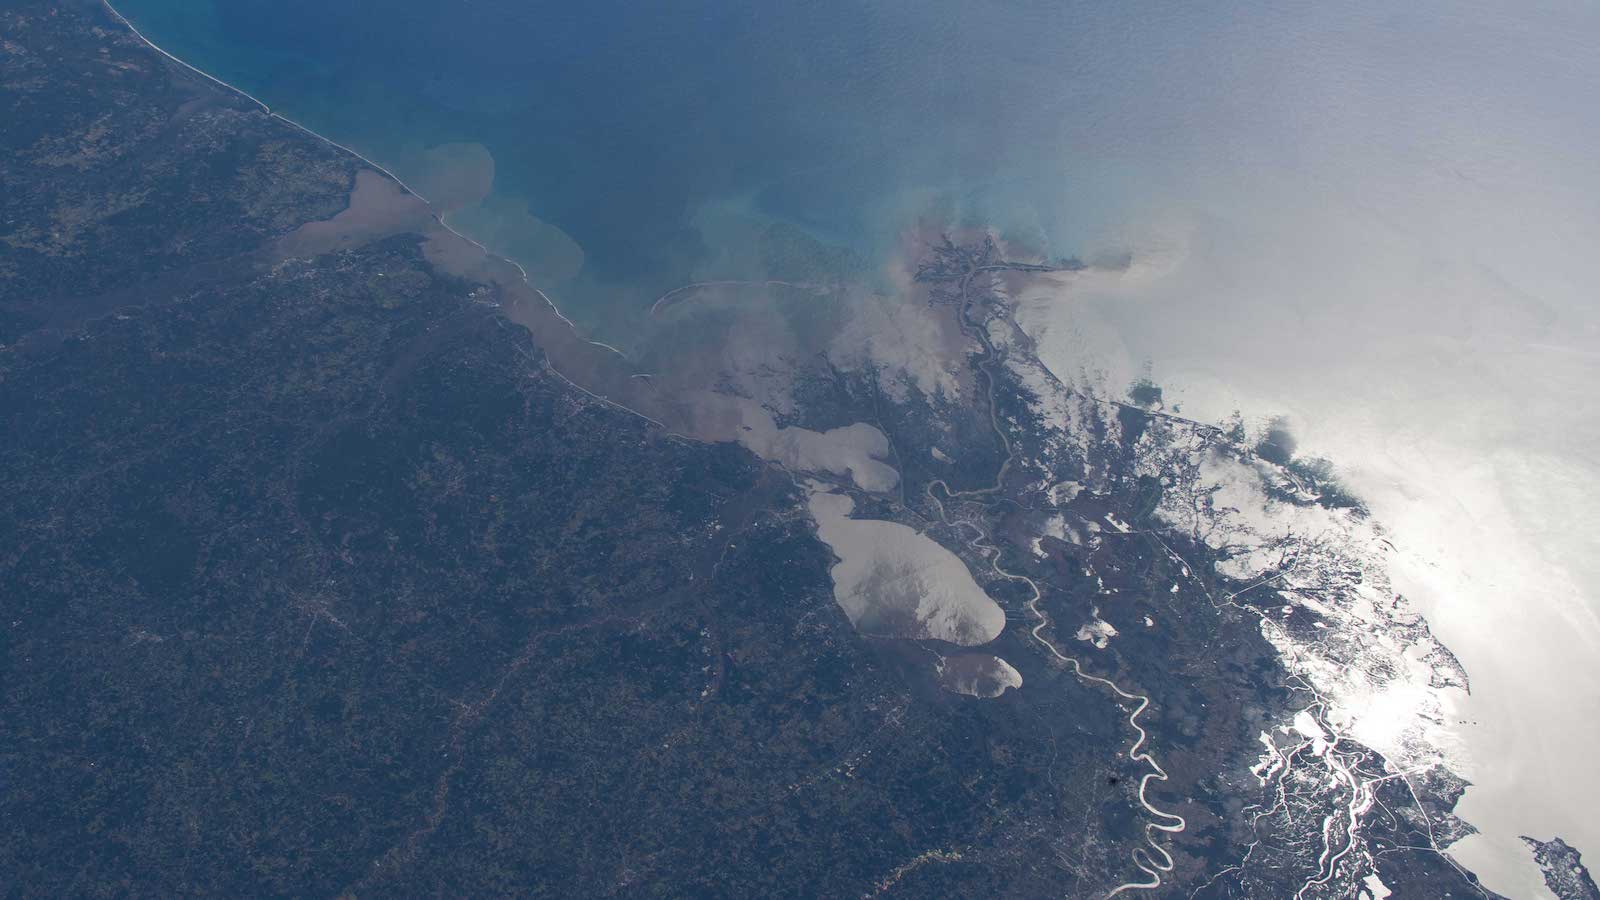 slide 4 - NASA Uses 30-Year Satellite Record to Track and Project Rising Seas